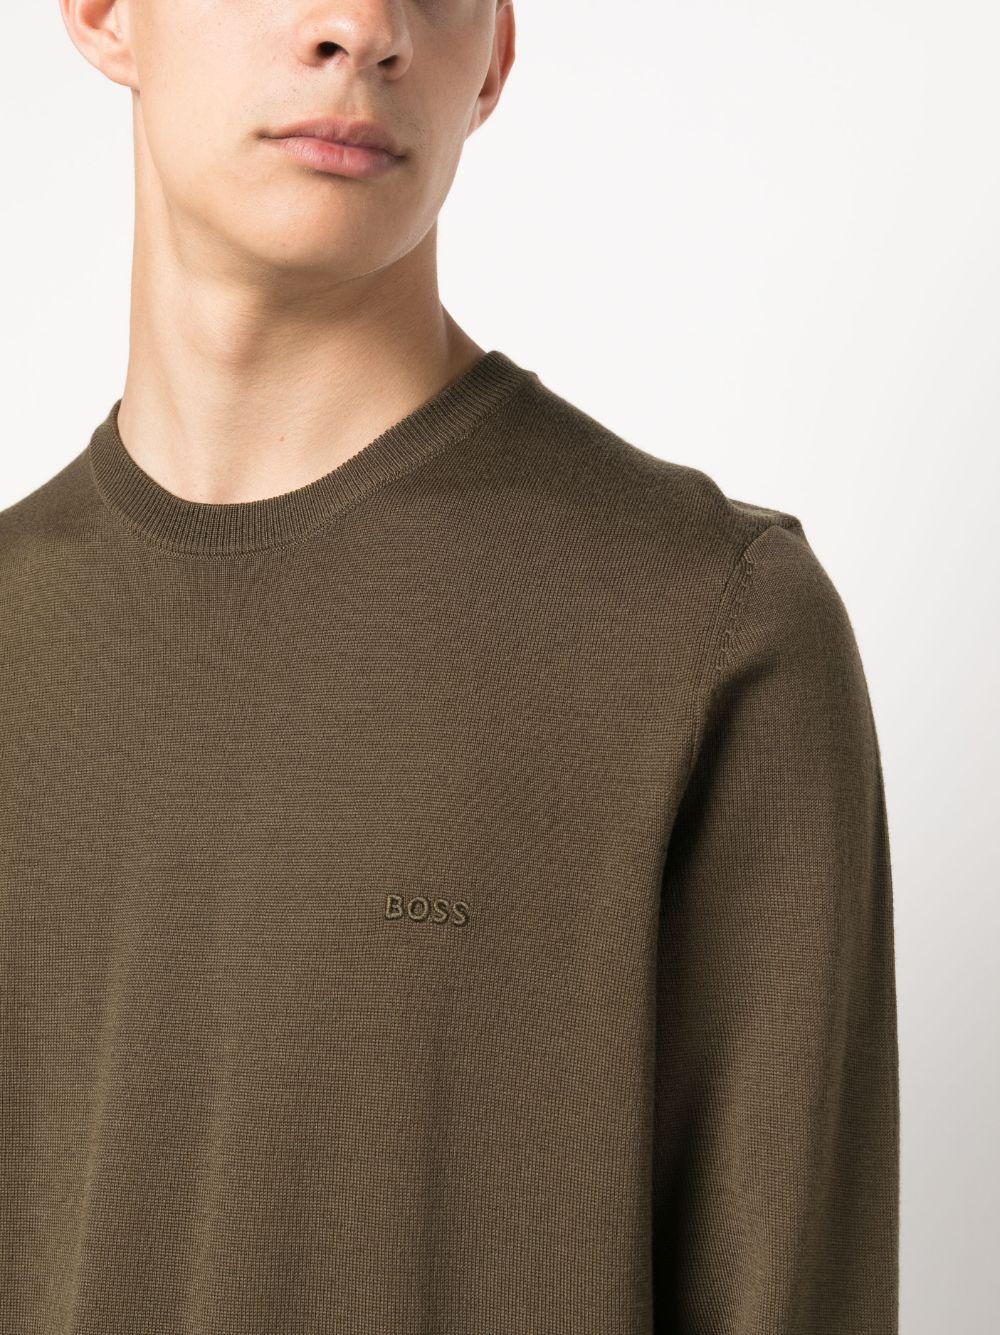 BOSS by HUGO BOSS Logo-embroidered Cotton Jumper in Brown for Men | Lyst